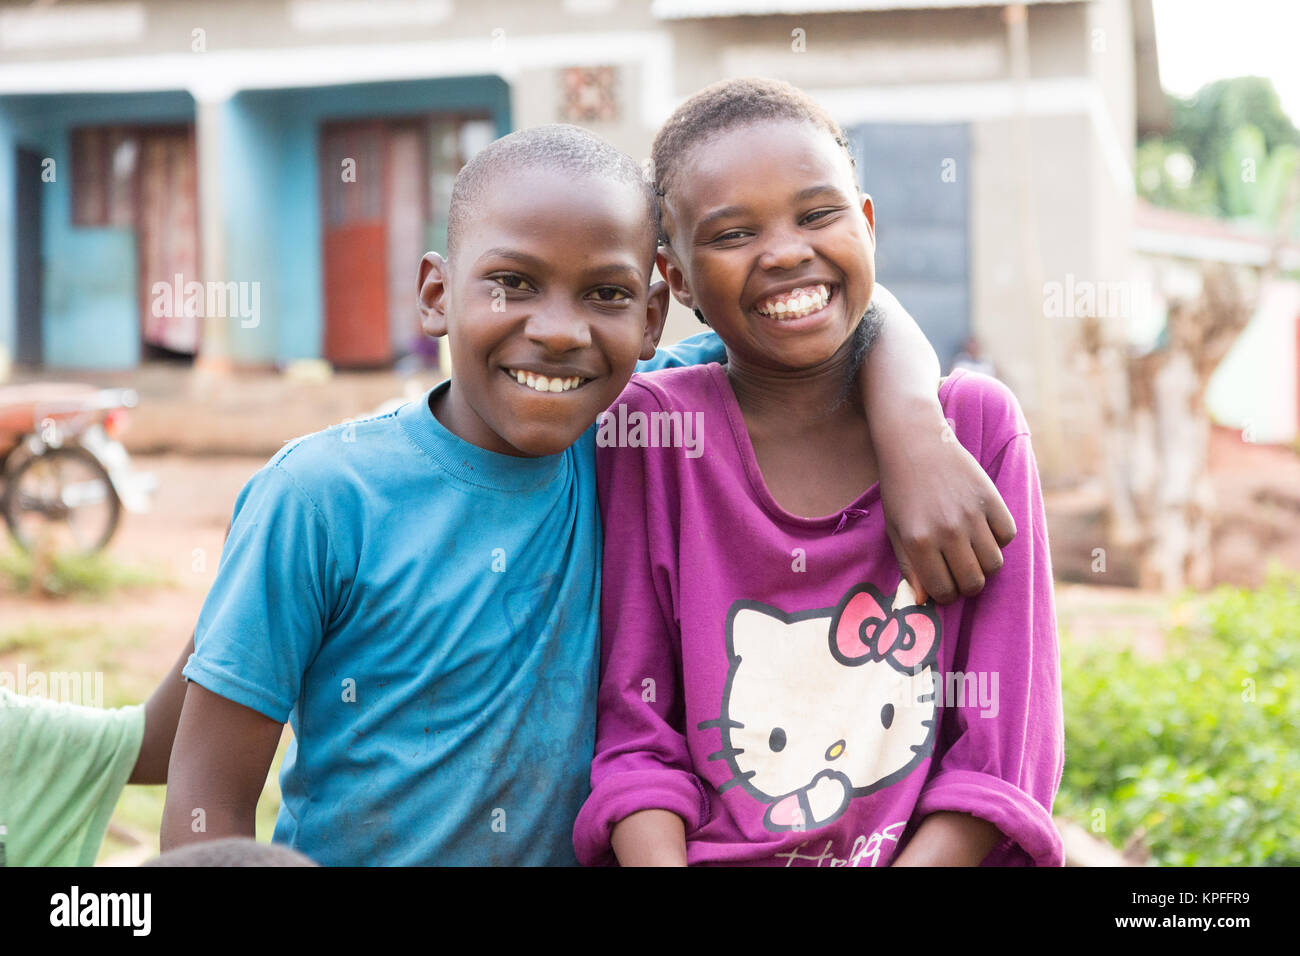 Lugazi, Uganda. June 18 2017. Two laughing Ugandan children - a boy and a girl - perhaps a brother and a sister. Stock Photo